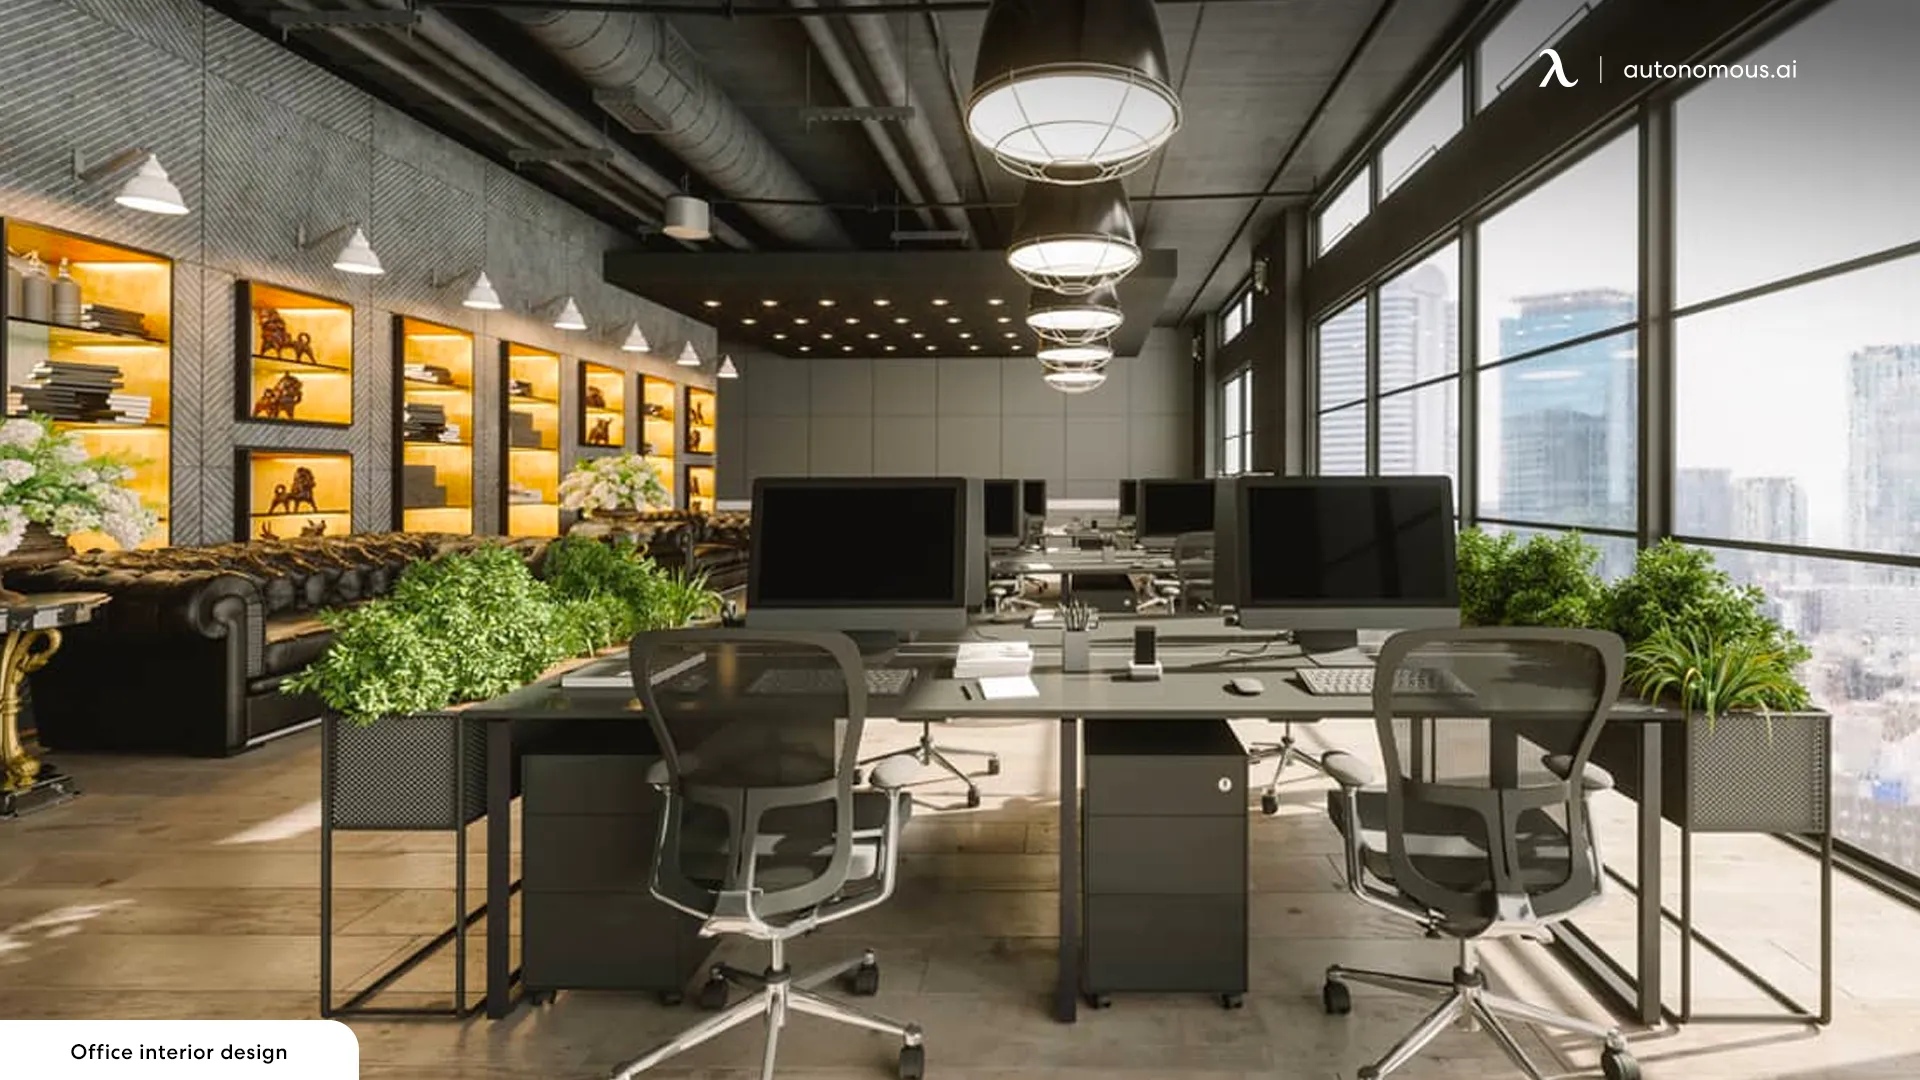 What Is a Sustainable Office?